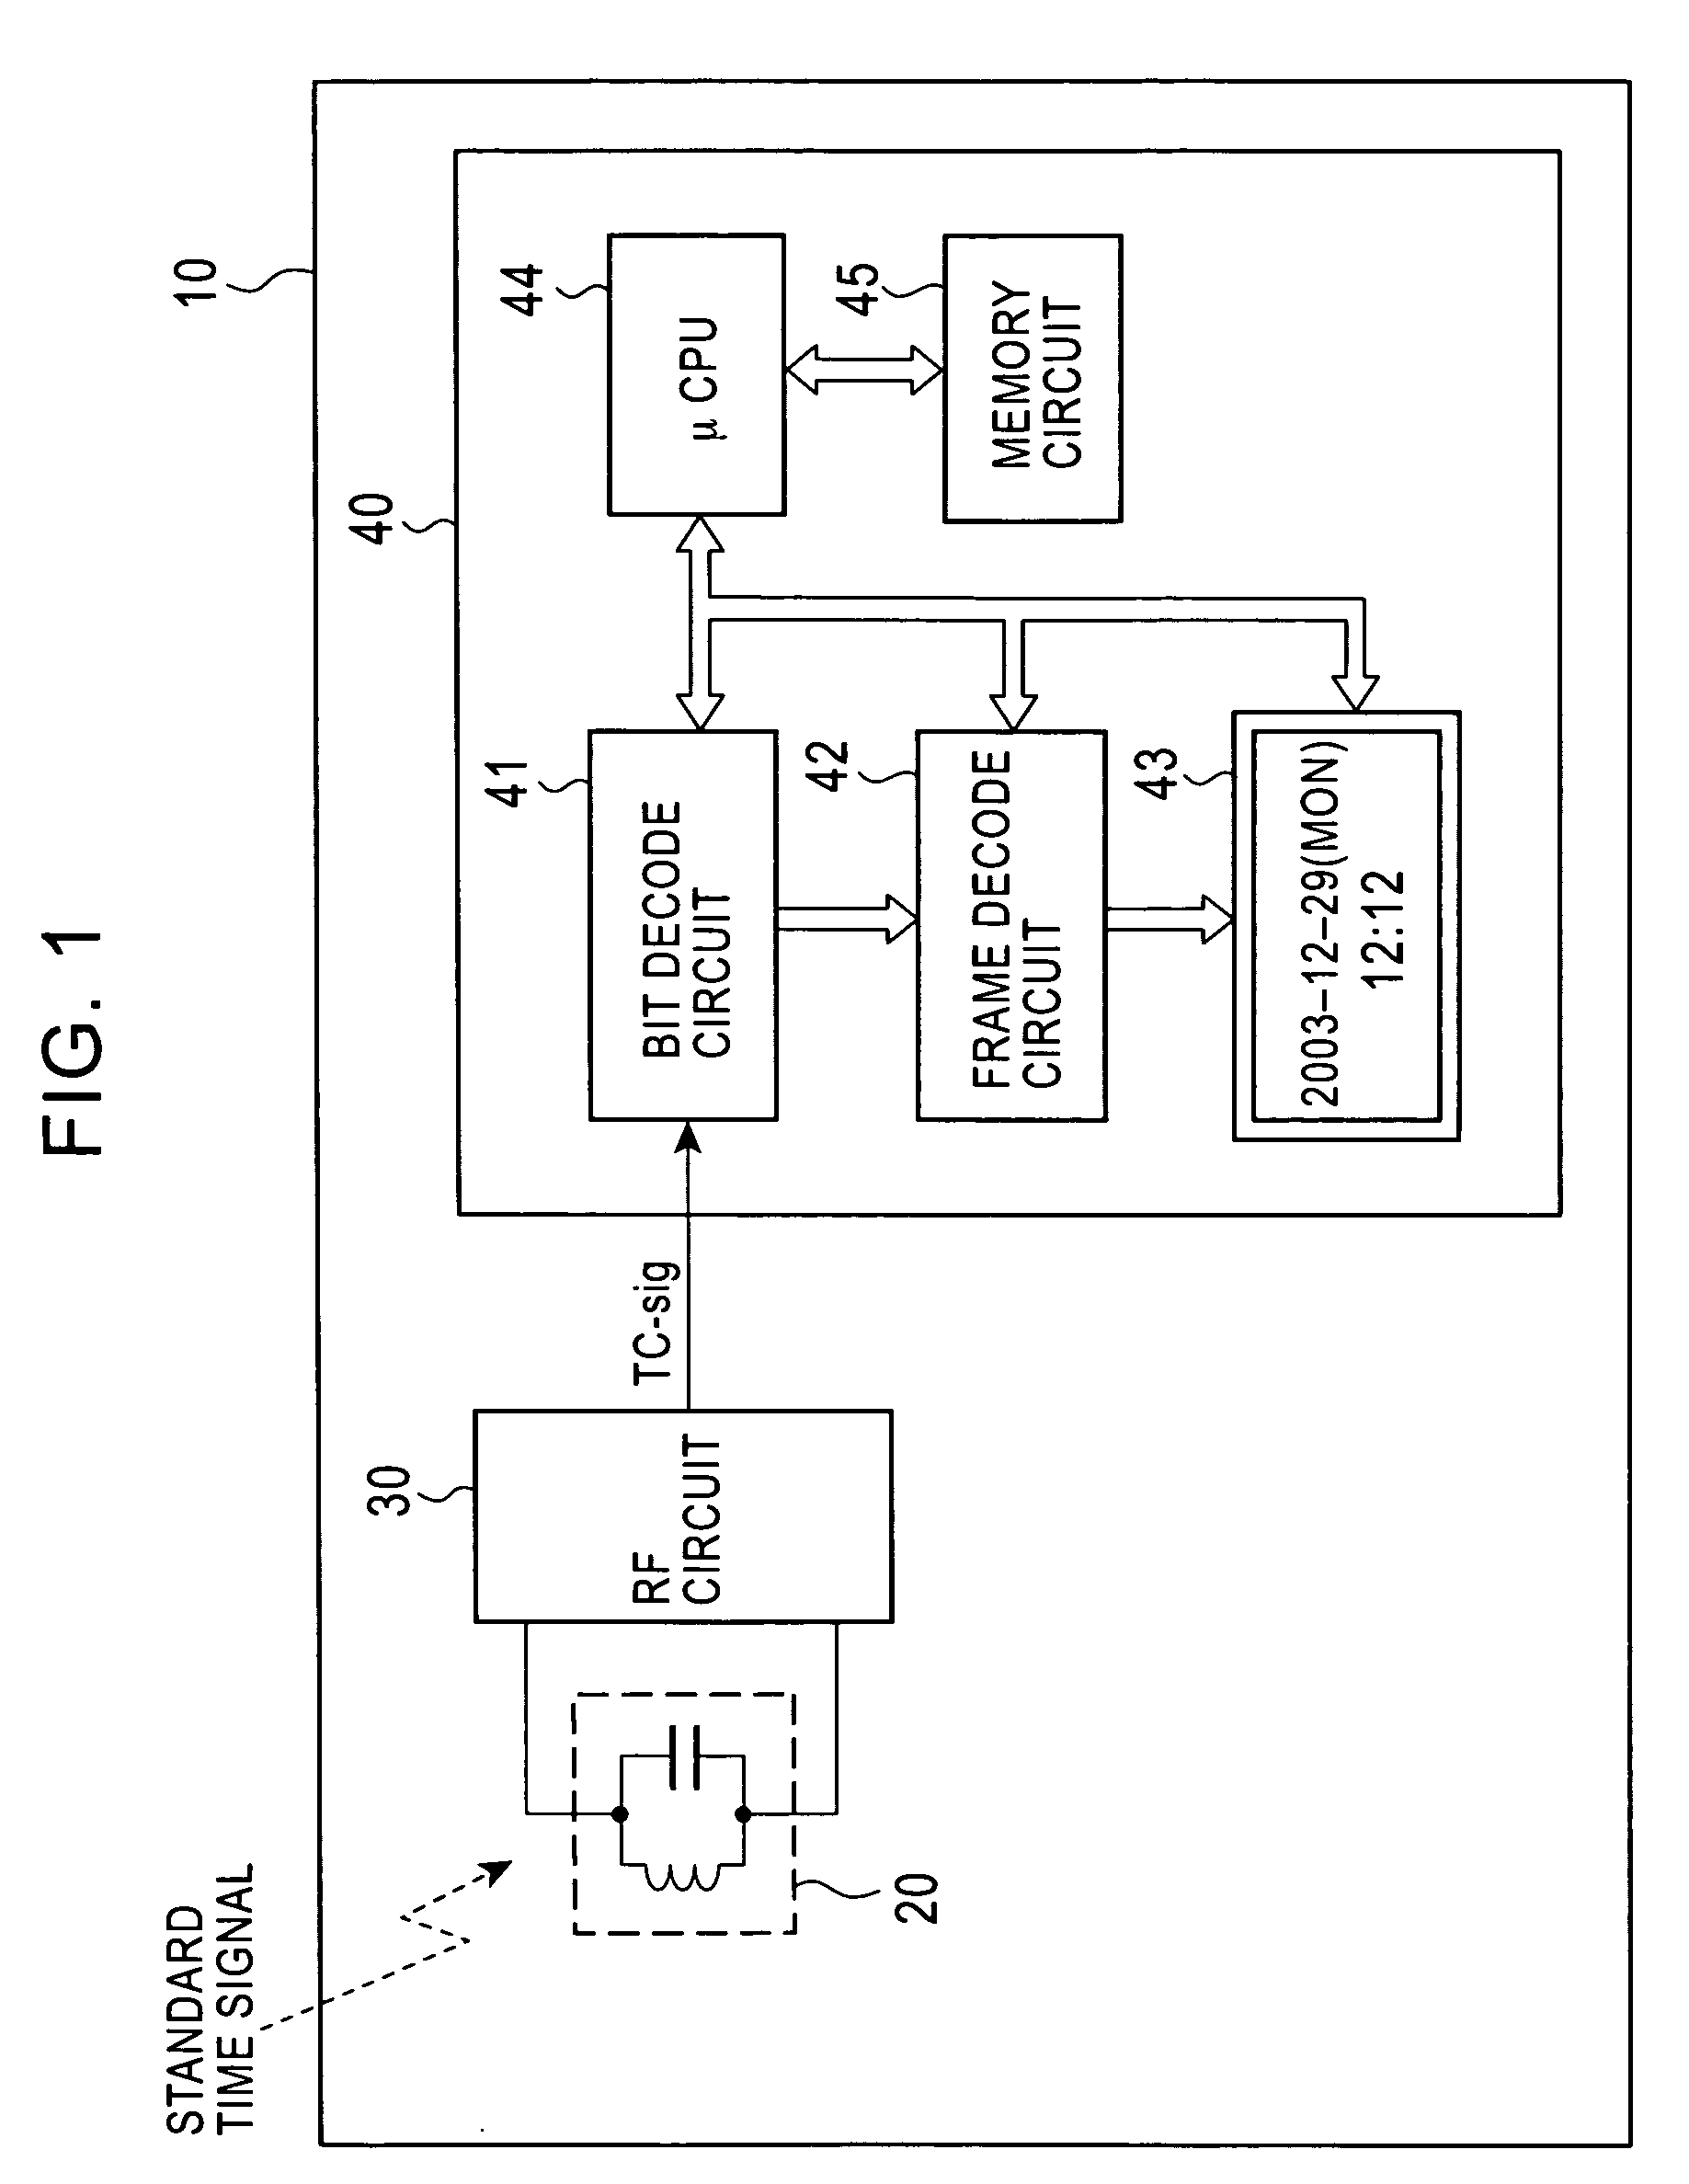 Standard time signal receiving time device and decoding method of time code signal